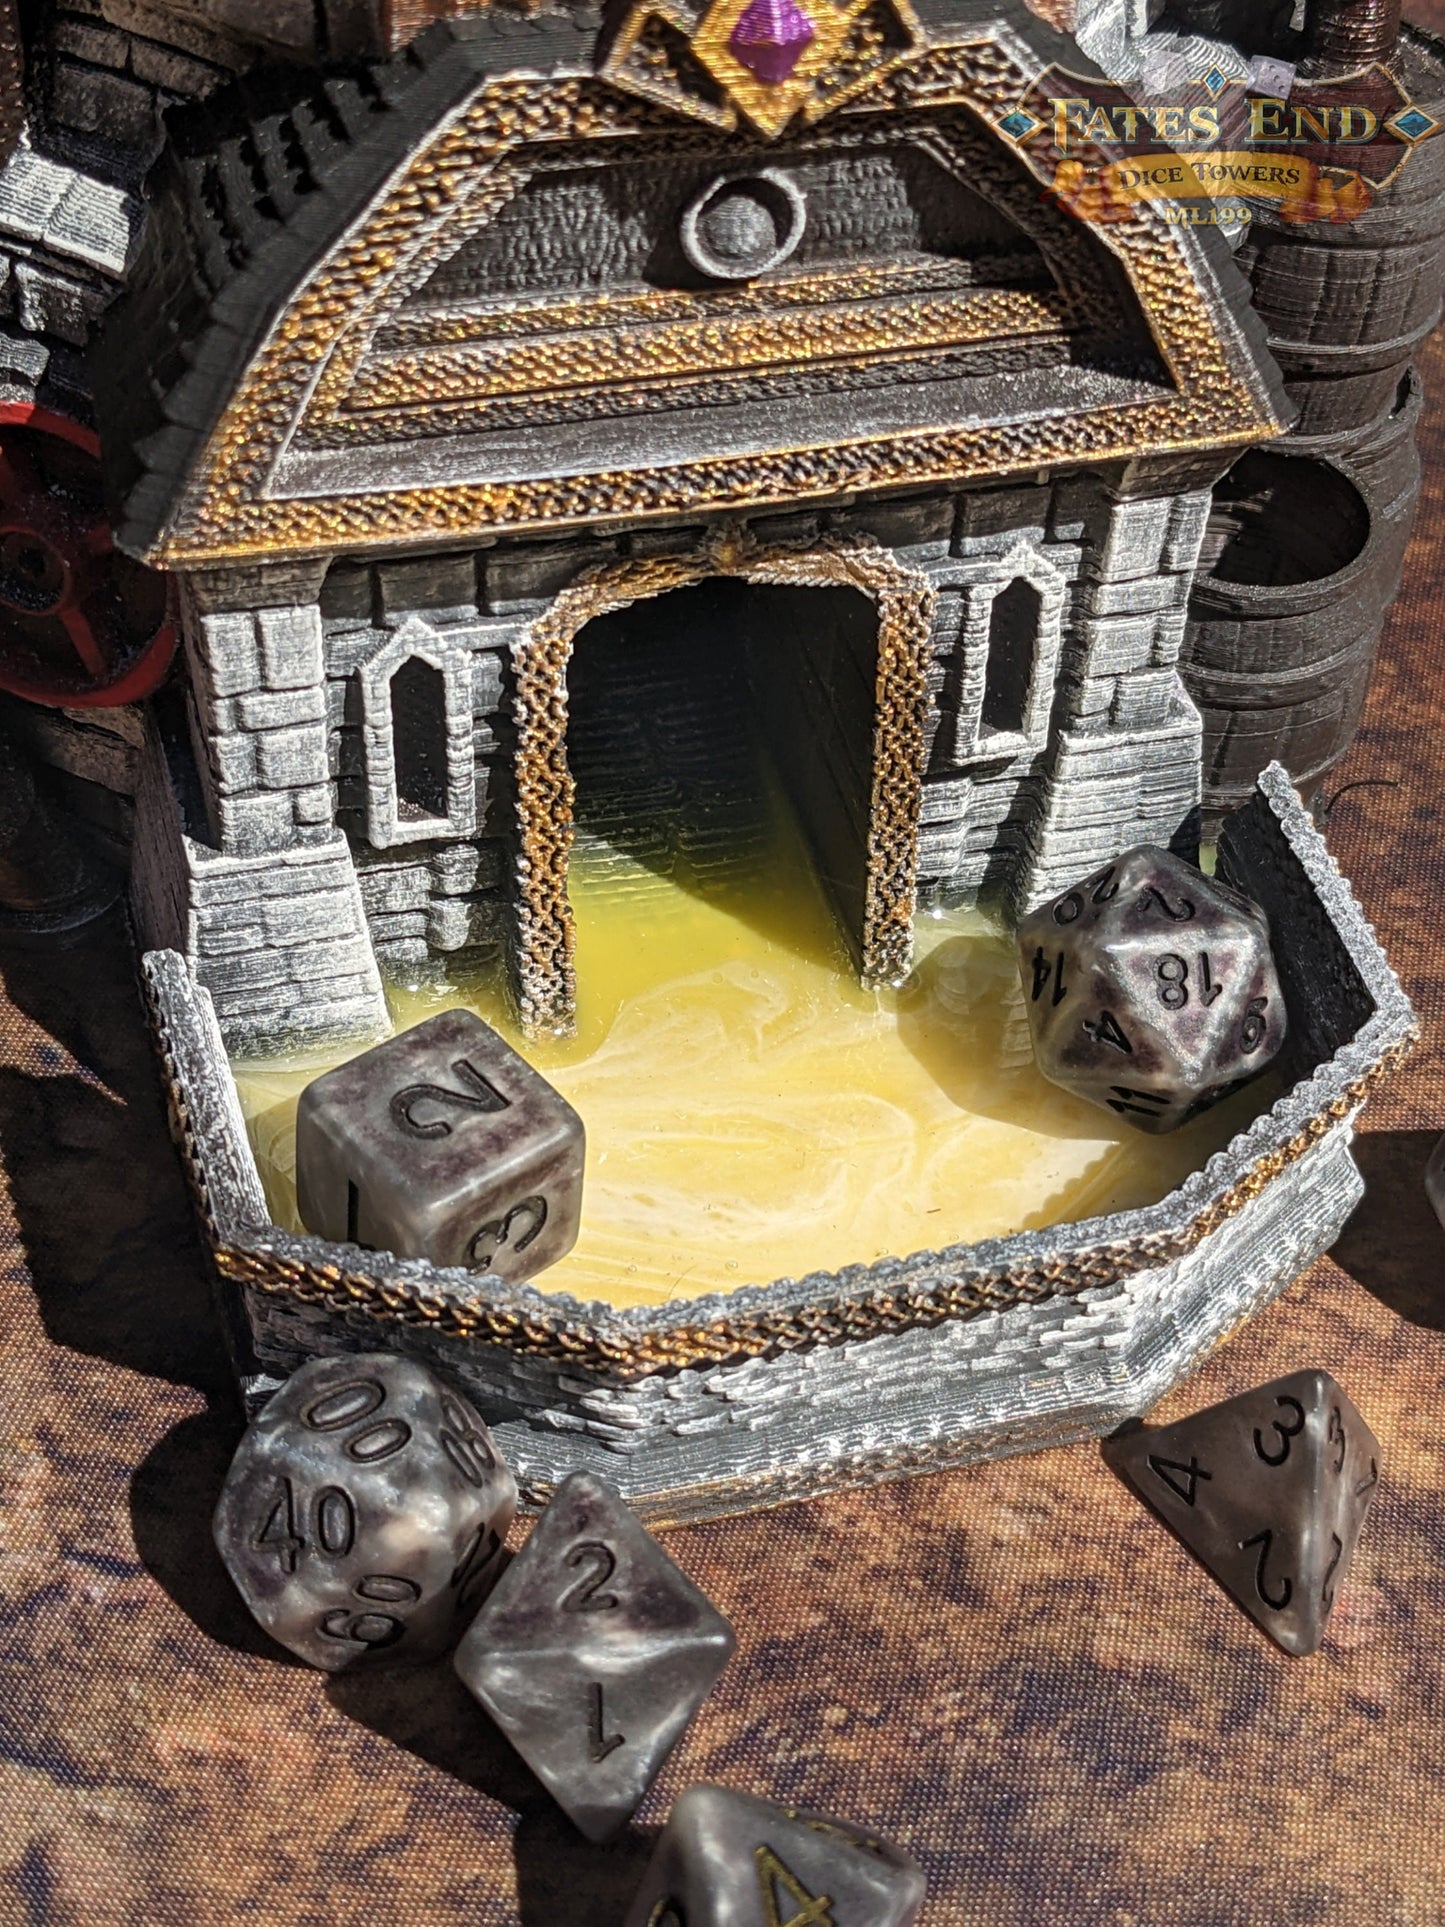 Dwarven Brewery Dice Tower - Fate's End Collection - Pour Forth Legendary Rolls Amidst Ale-Infused Anvils.